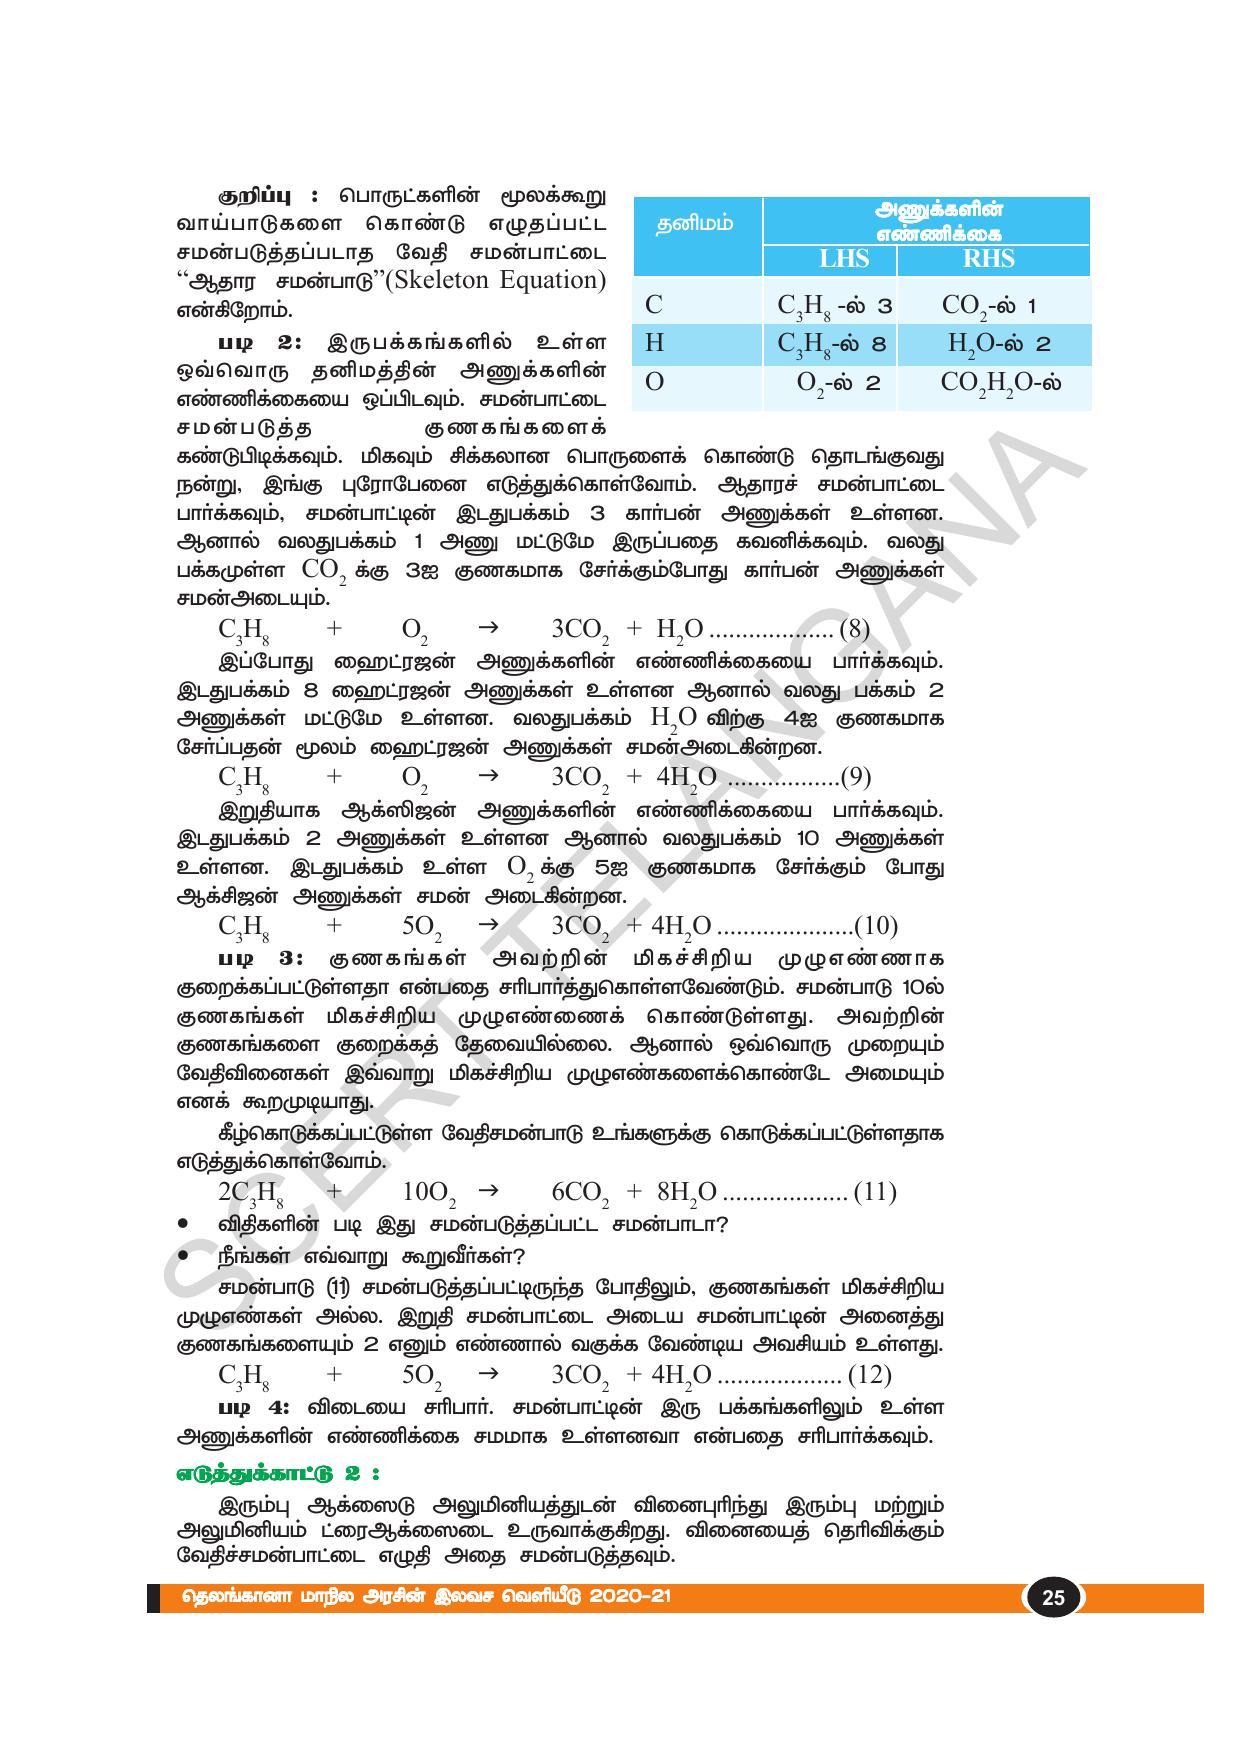 TS SCERT Class 10 Physical Science(Tamil Medium) Text Book - Page 37